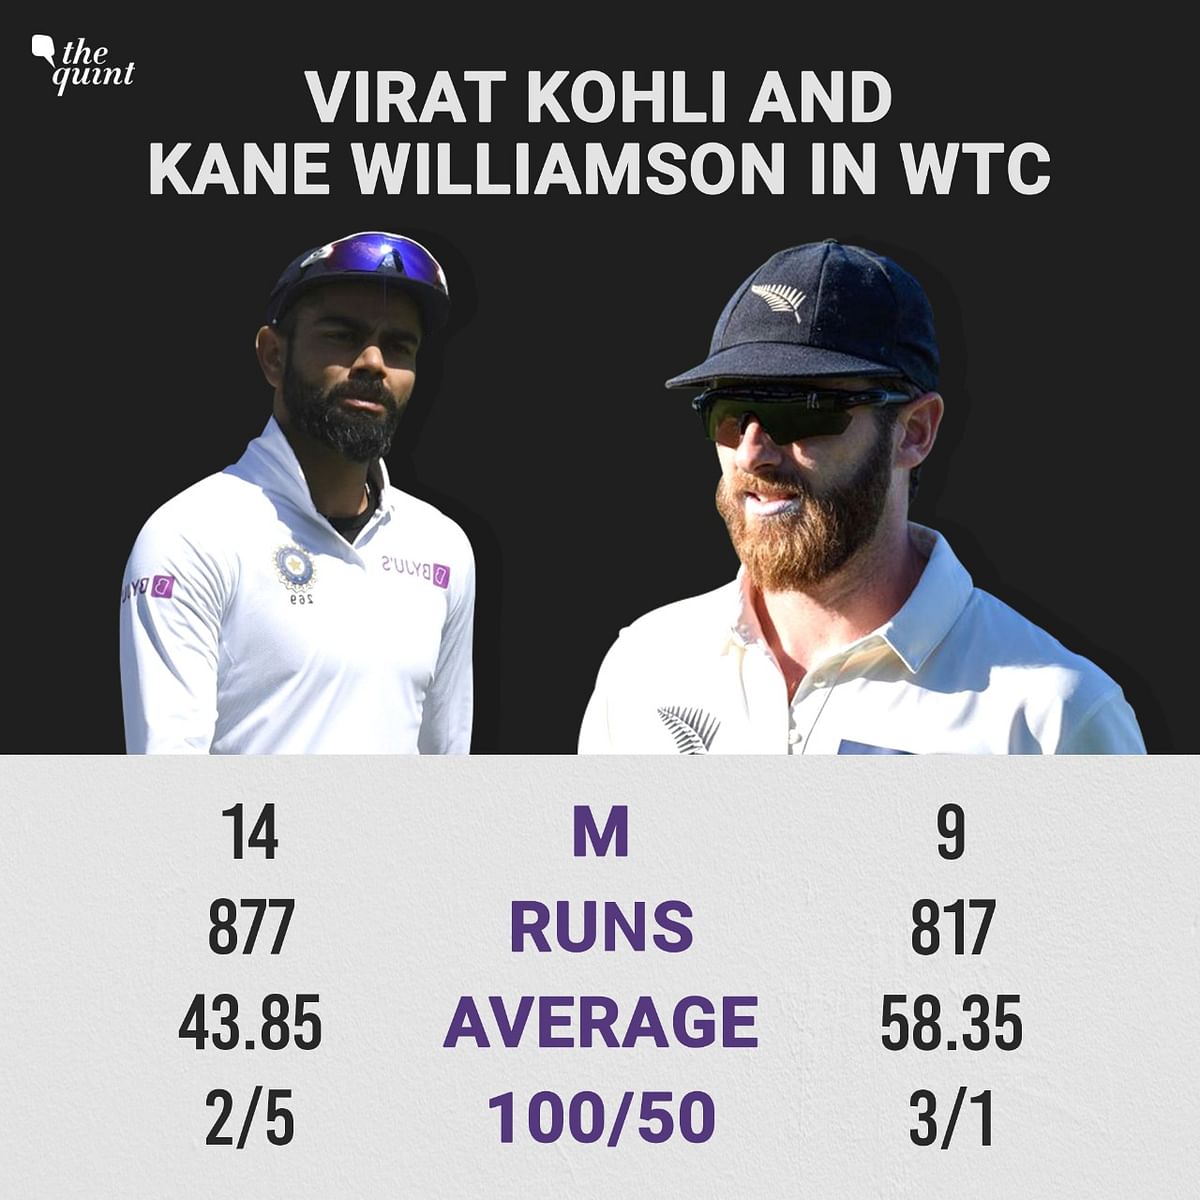 At Southampton, when fire meets ice, expect Kohli and Williamson, to turn on the style in the hunt for silverware. 